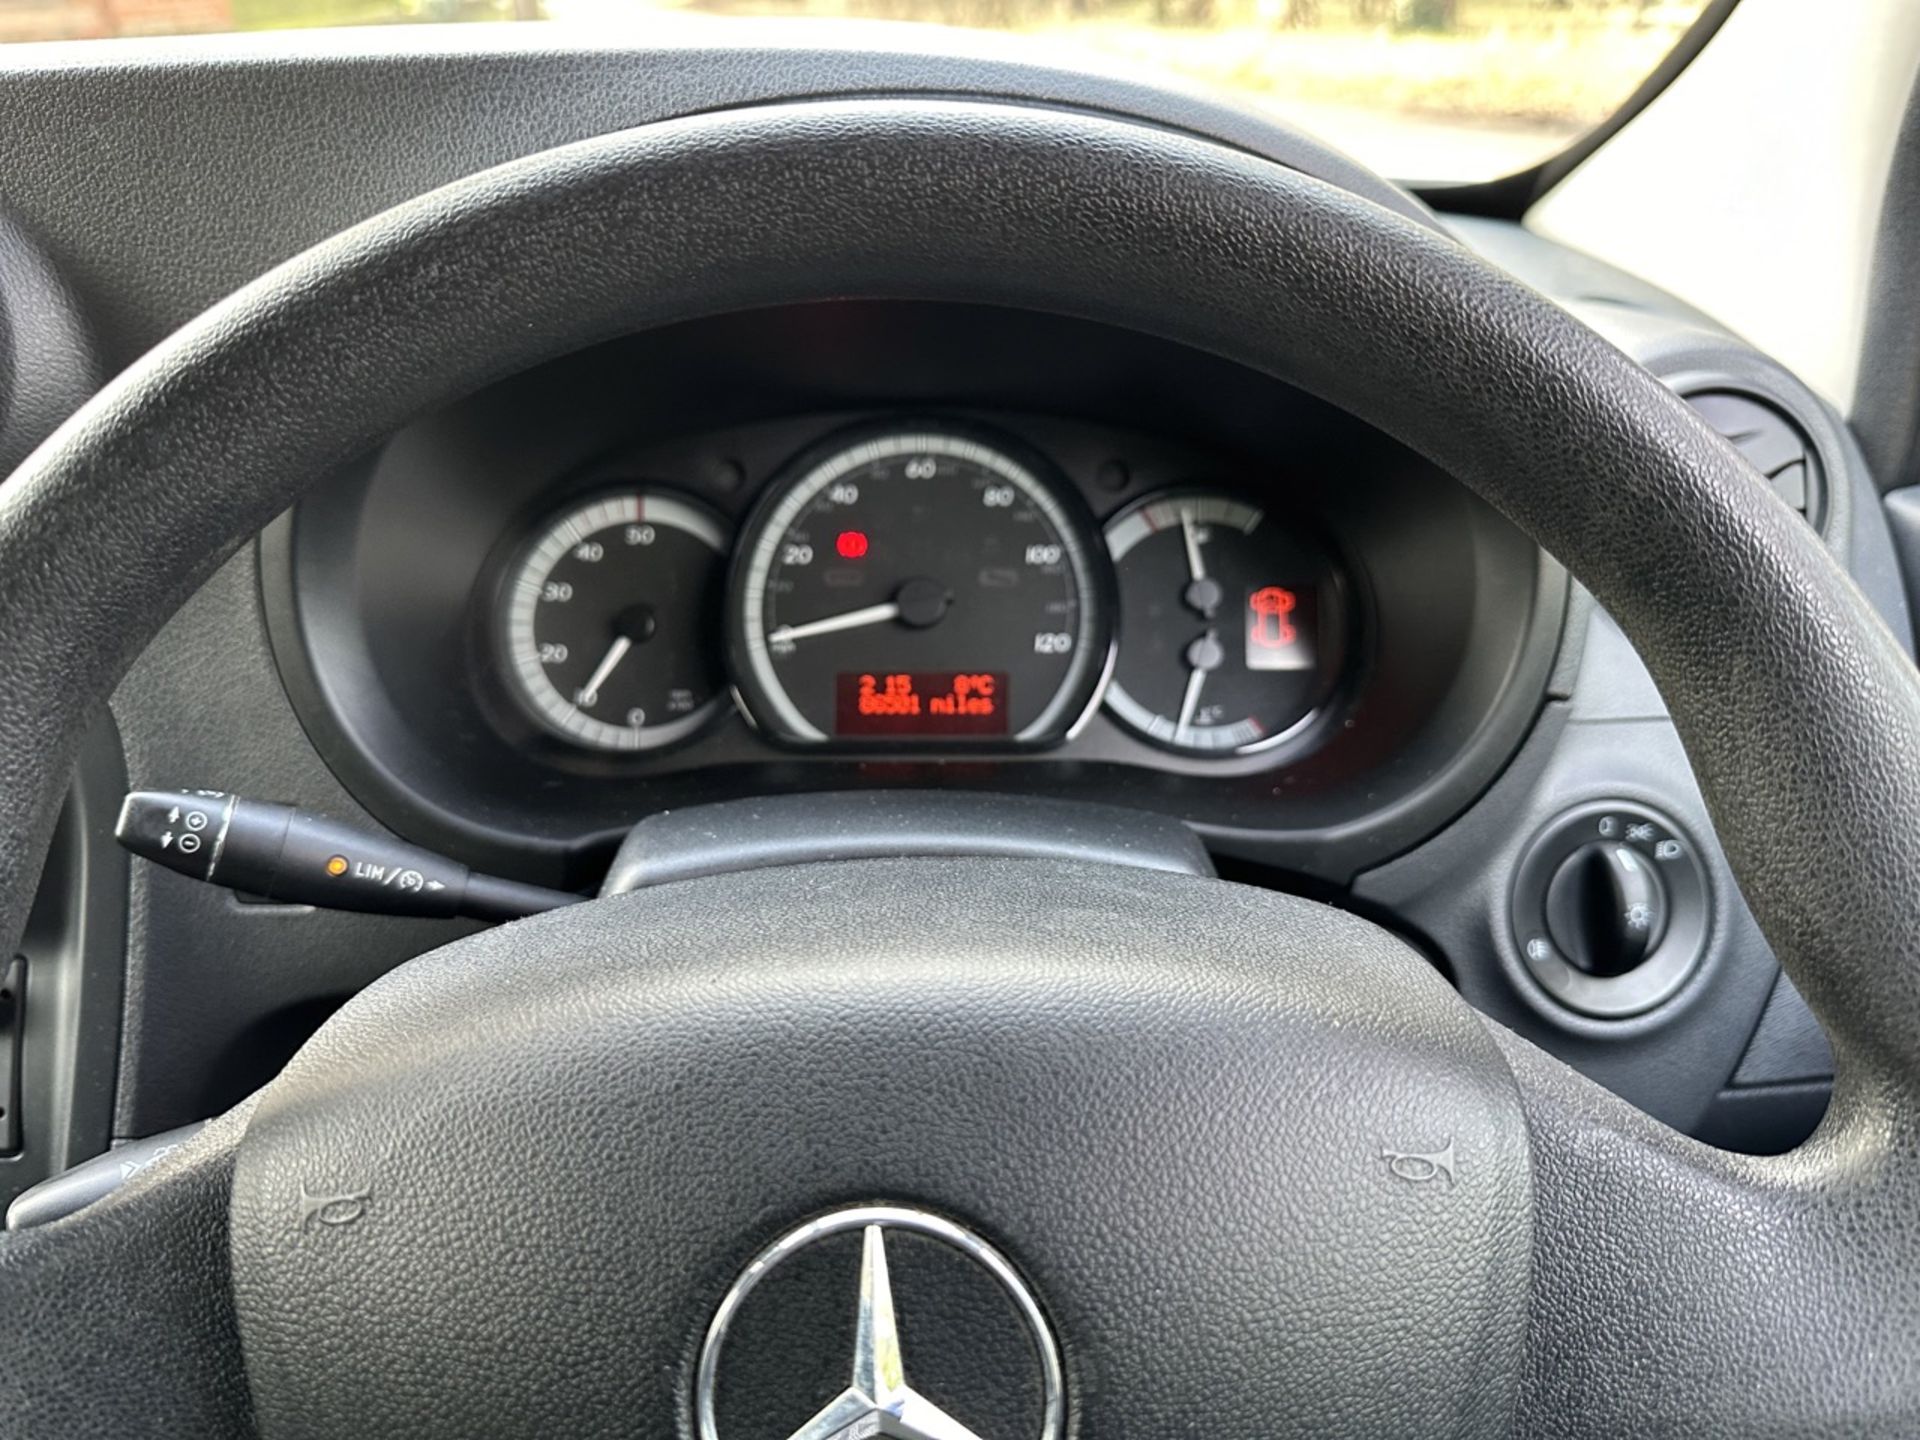 Mercedes Citan 109Cdi "LWB" Euro 6 (2021 MODEL) 1 Owner From New - 86K Miles From New - FSH - - Image 11 of 11